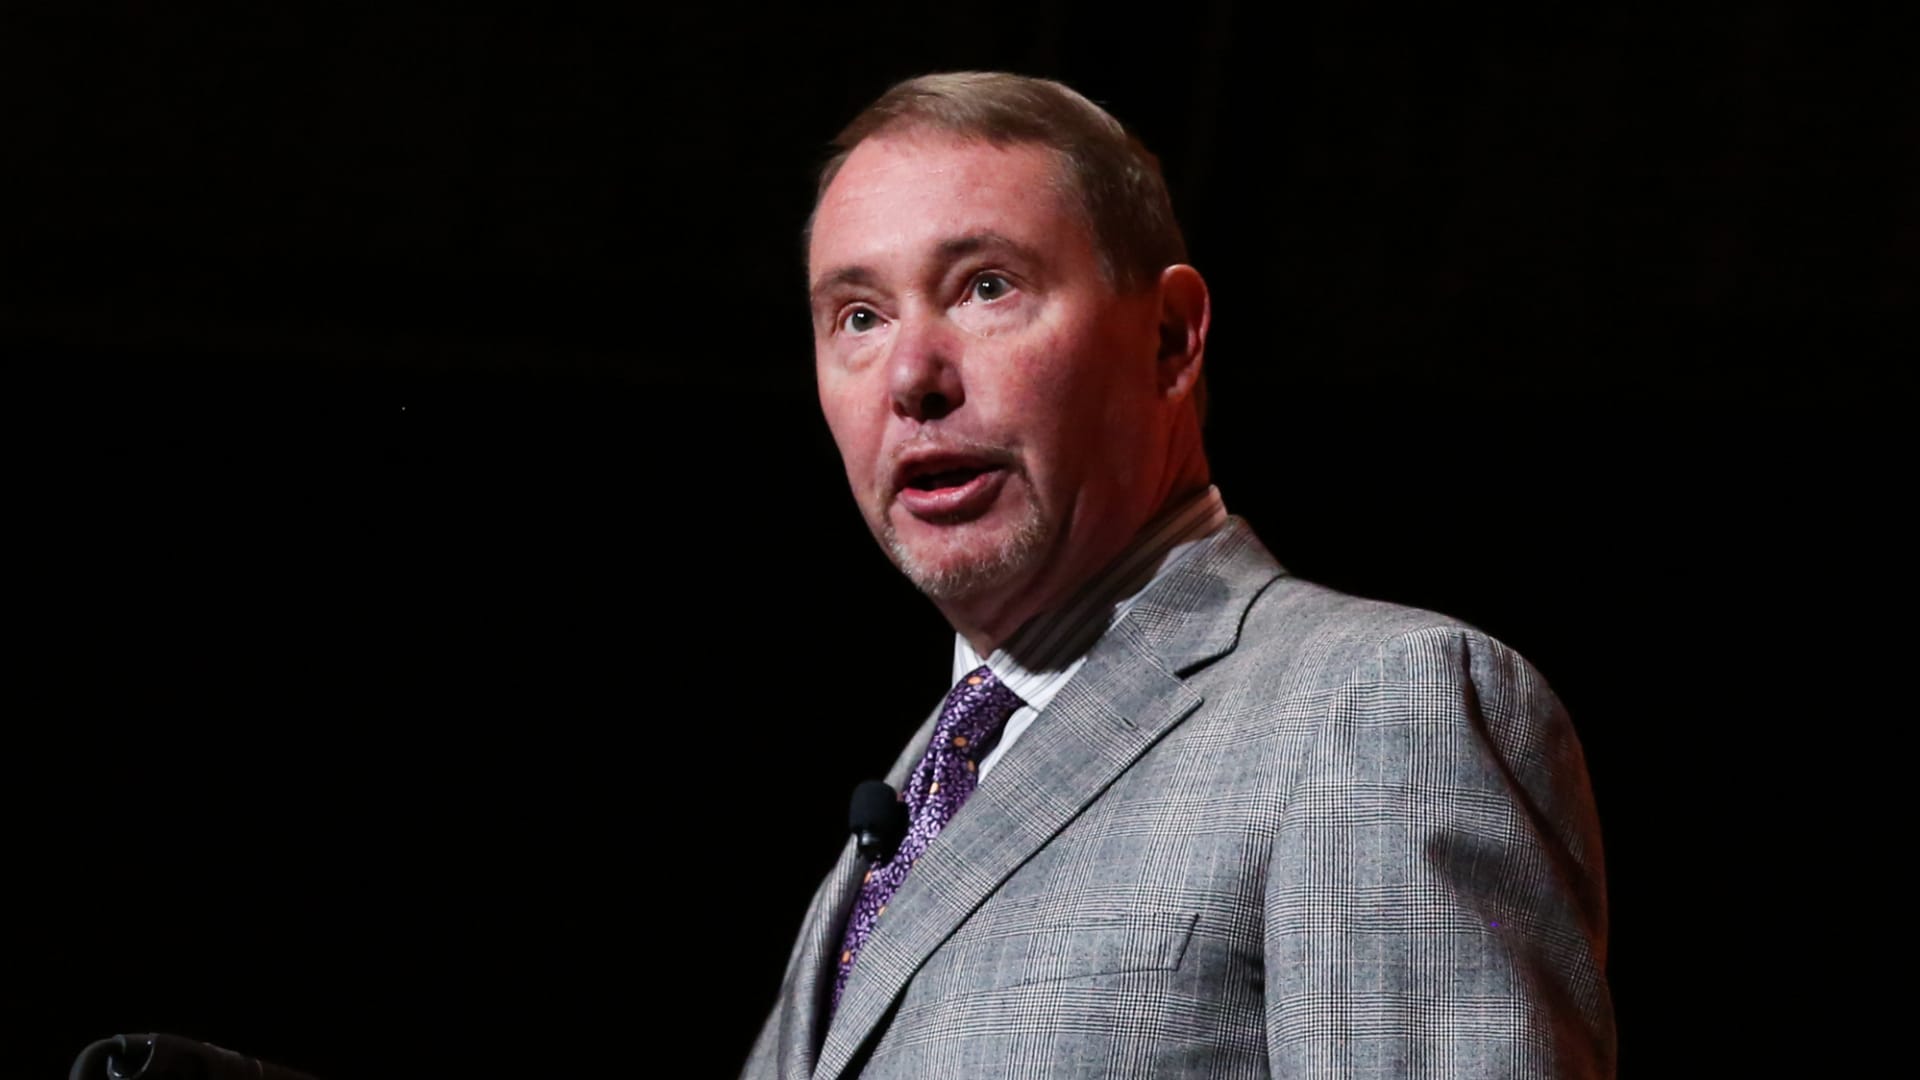 DoubleLine’s Jeffrey Gundlach reveals his buying and selling approach in this tough industry